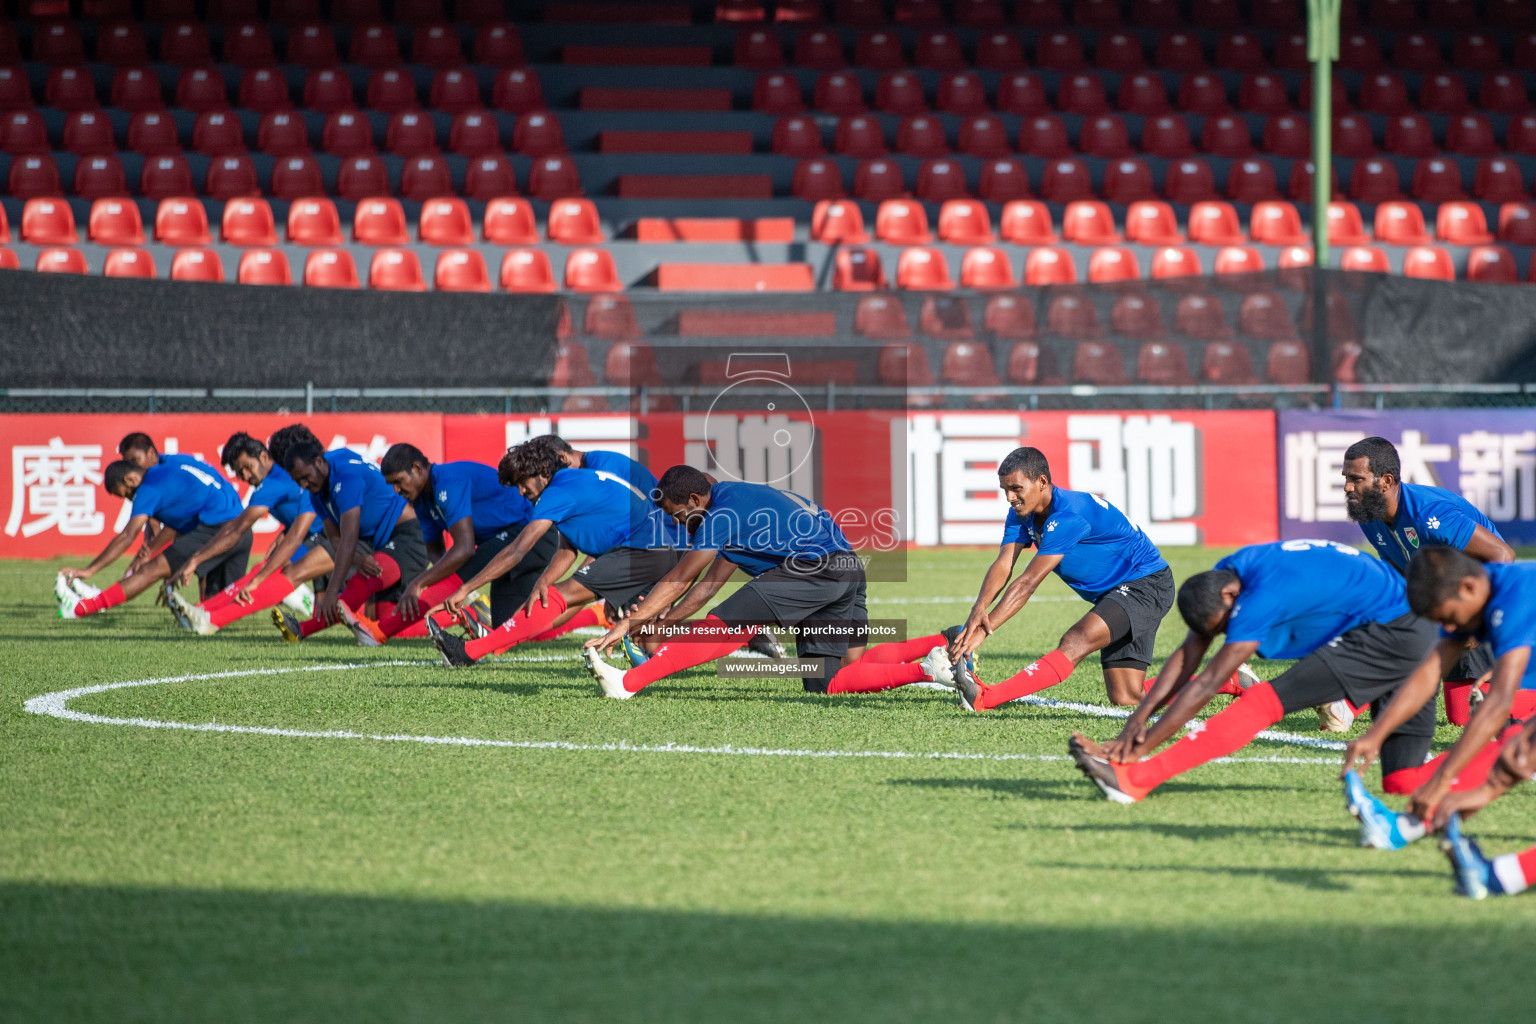 Maldives Practice Session for the FIfa World Cup Qatar 2022 & AFC Asian Cup China 2023 Qualifier match against China on 13th November 2019 in National Football Stadium, Male', Maldives. (Photos: Shuadh Abdul Sattar/images.mv)